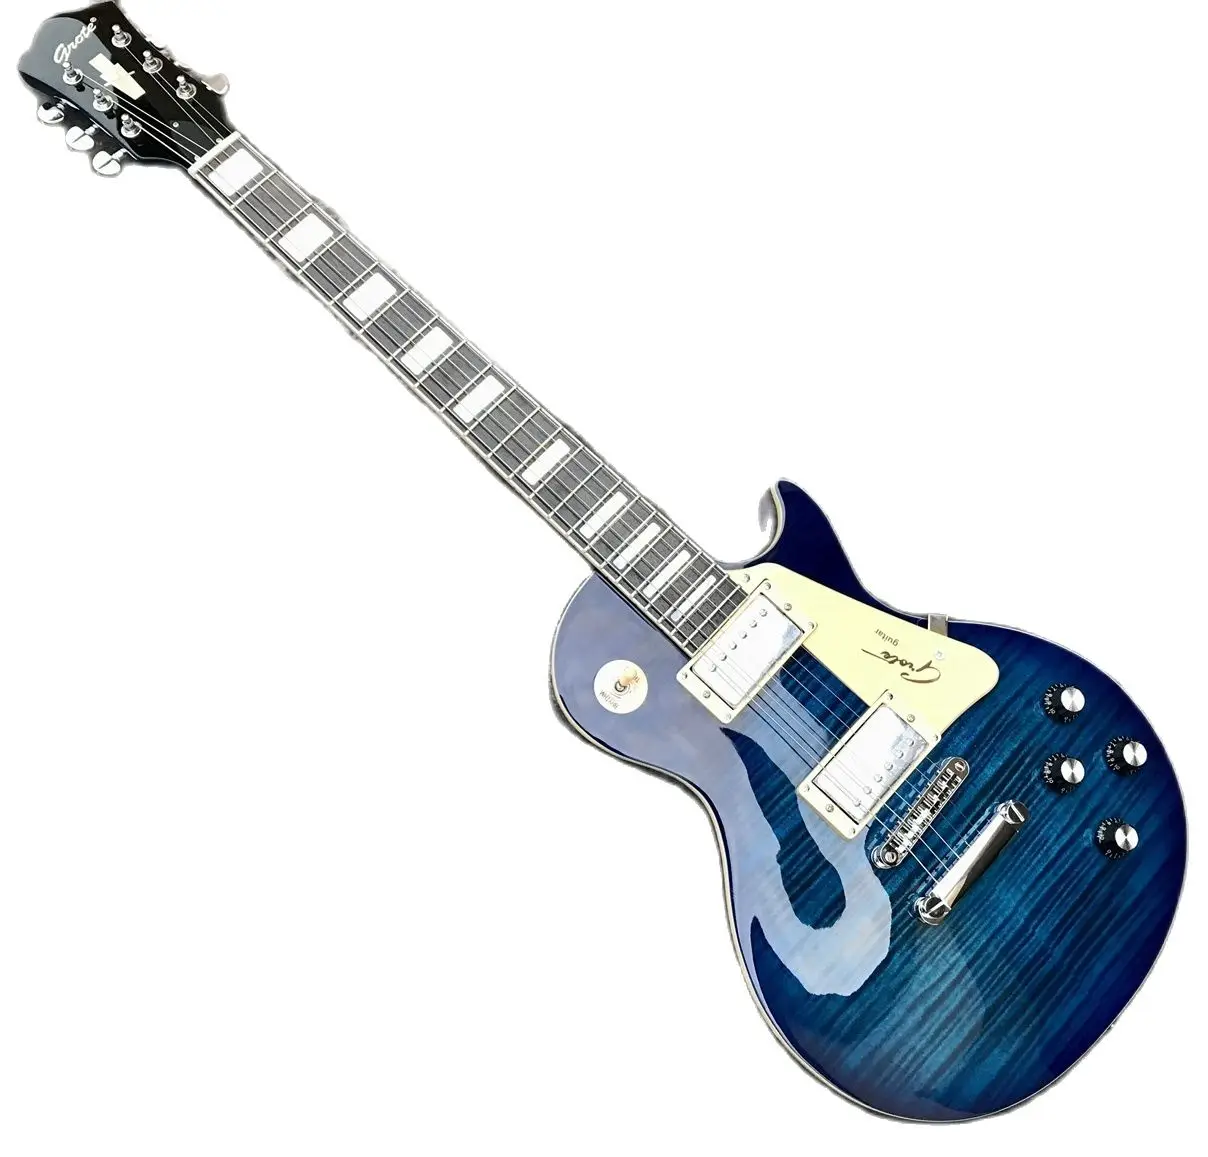 Upgrade Blue Chibson Electric Guitar Flame Maple Top Body Alnico Humbucker pickups  Imported Hardware